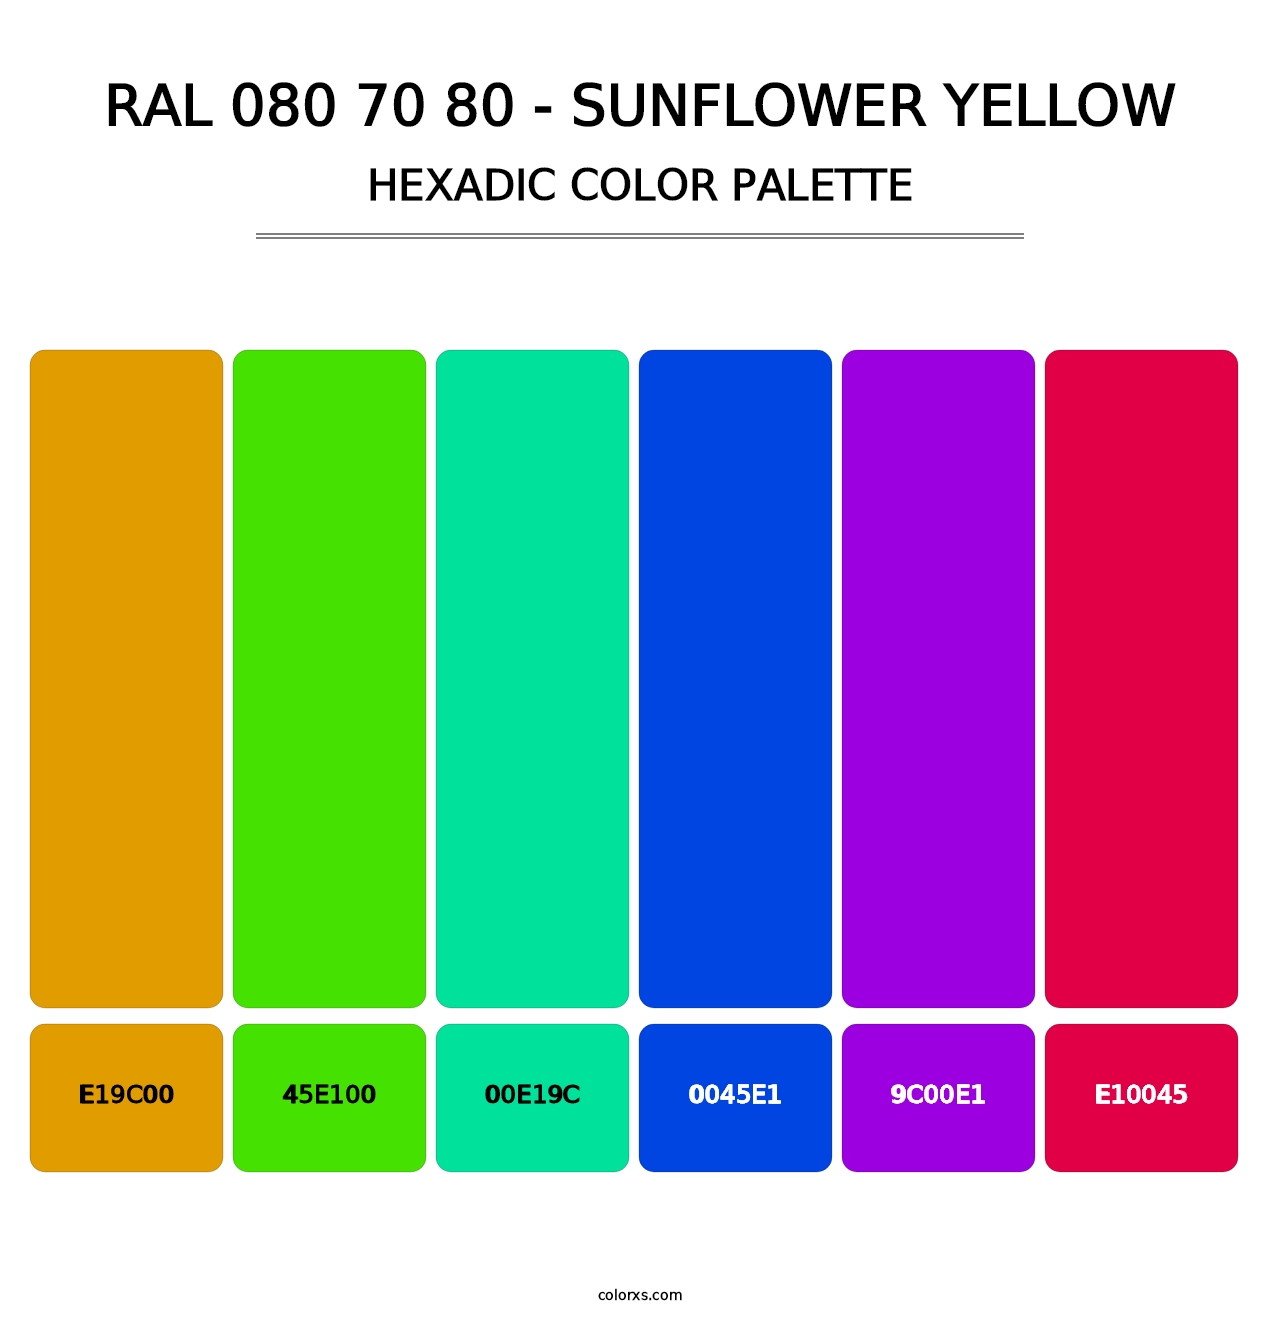 RAL 080 70 80 - Sunflower Yellow - Hexadic Color Palette